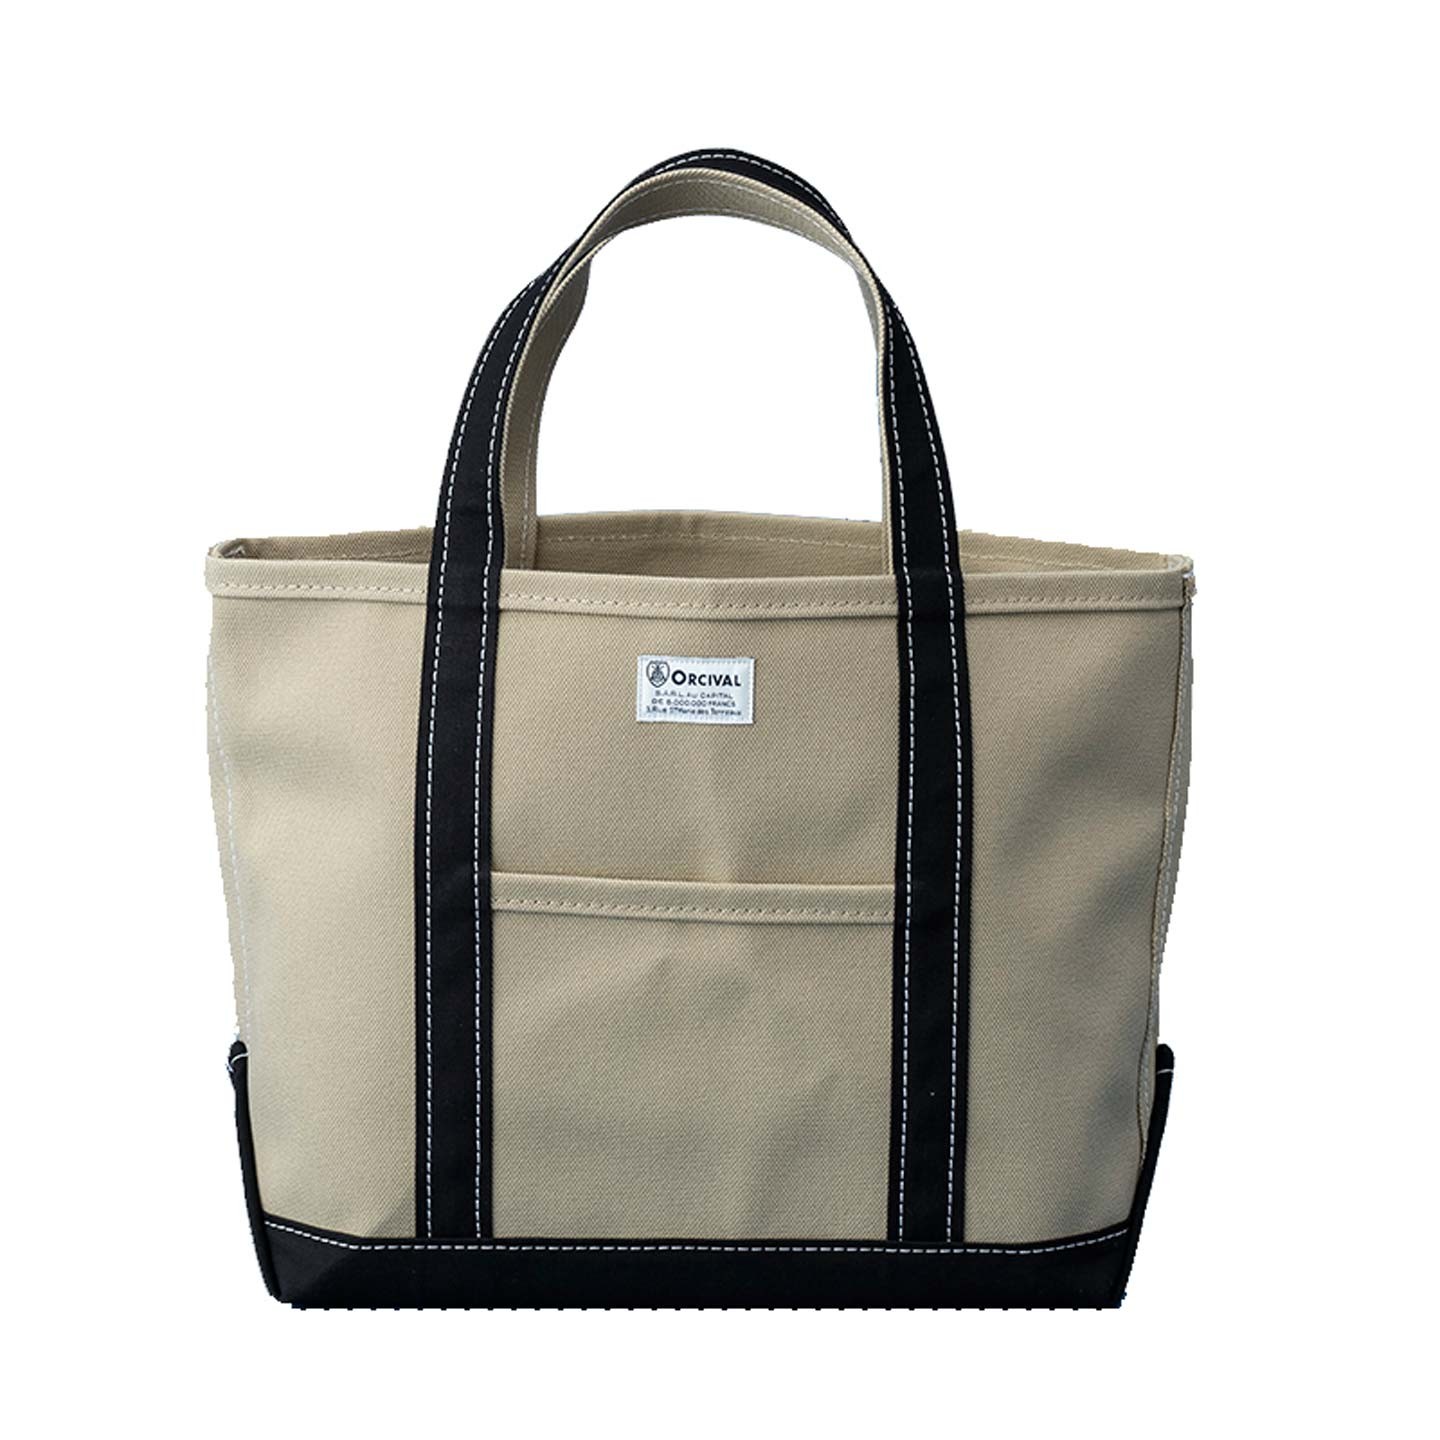 The Khaki Black tote-bag by Orcival in medium size